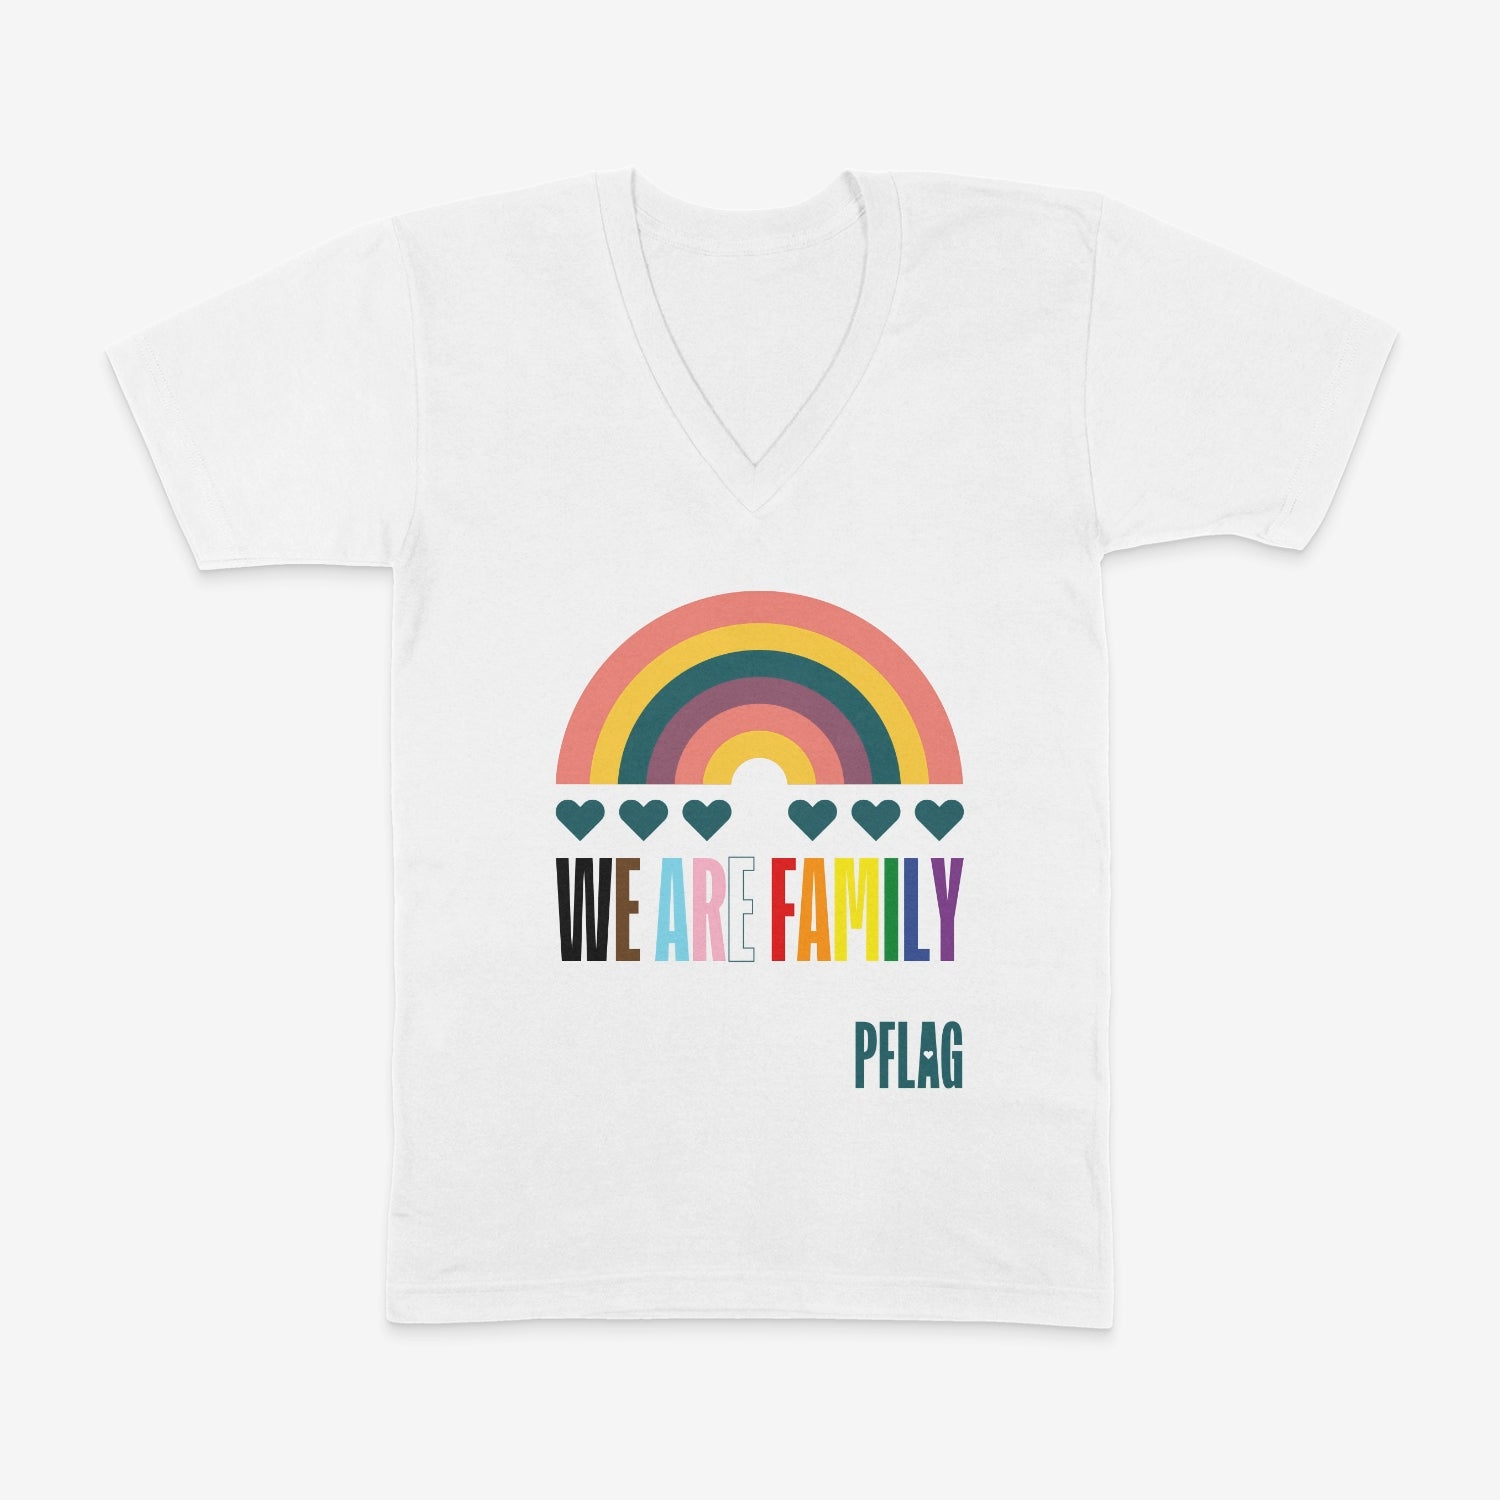 We Are Family - Wide-Cut V-Neck Short Sleeve T-Shirt